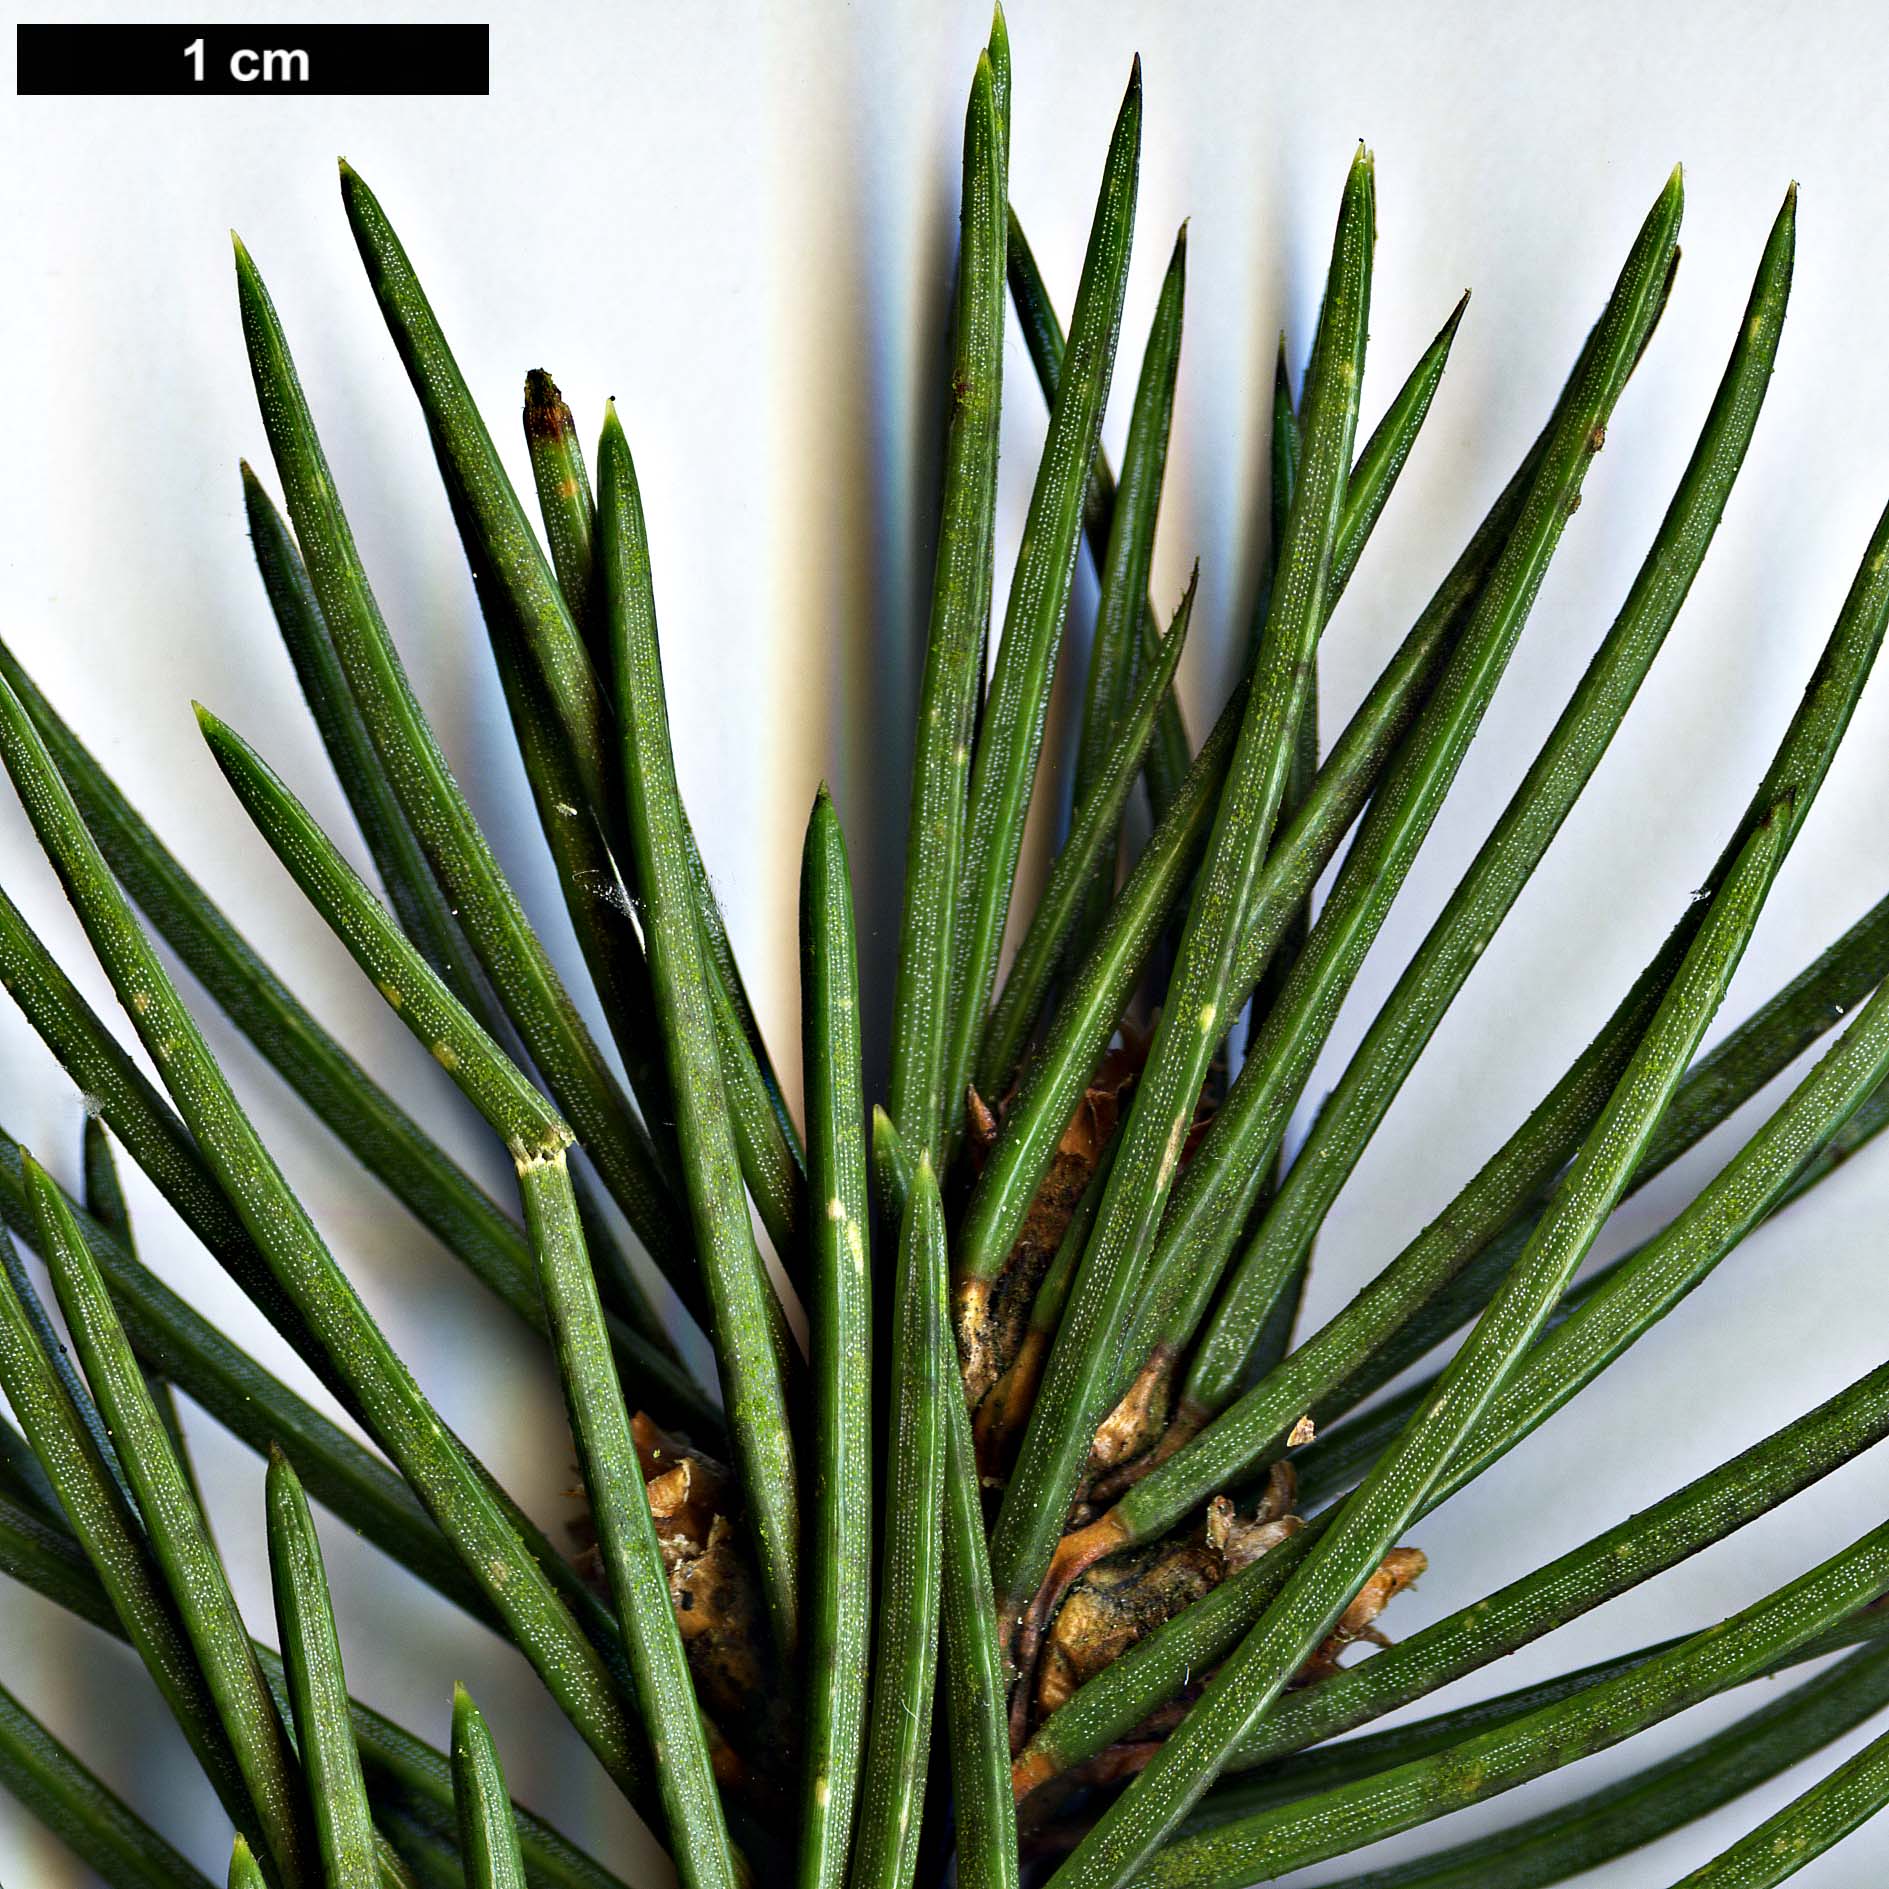 High resolution image: Family: Pinaceae - Genus: Picea - Taxon: pungens